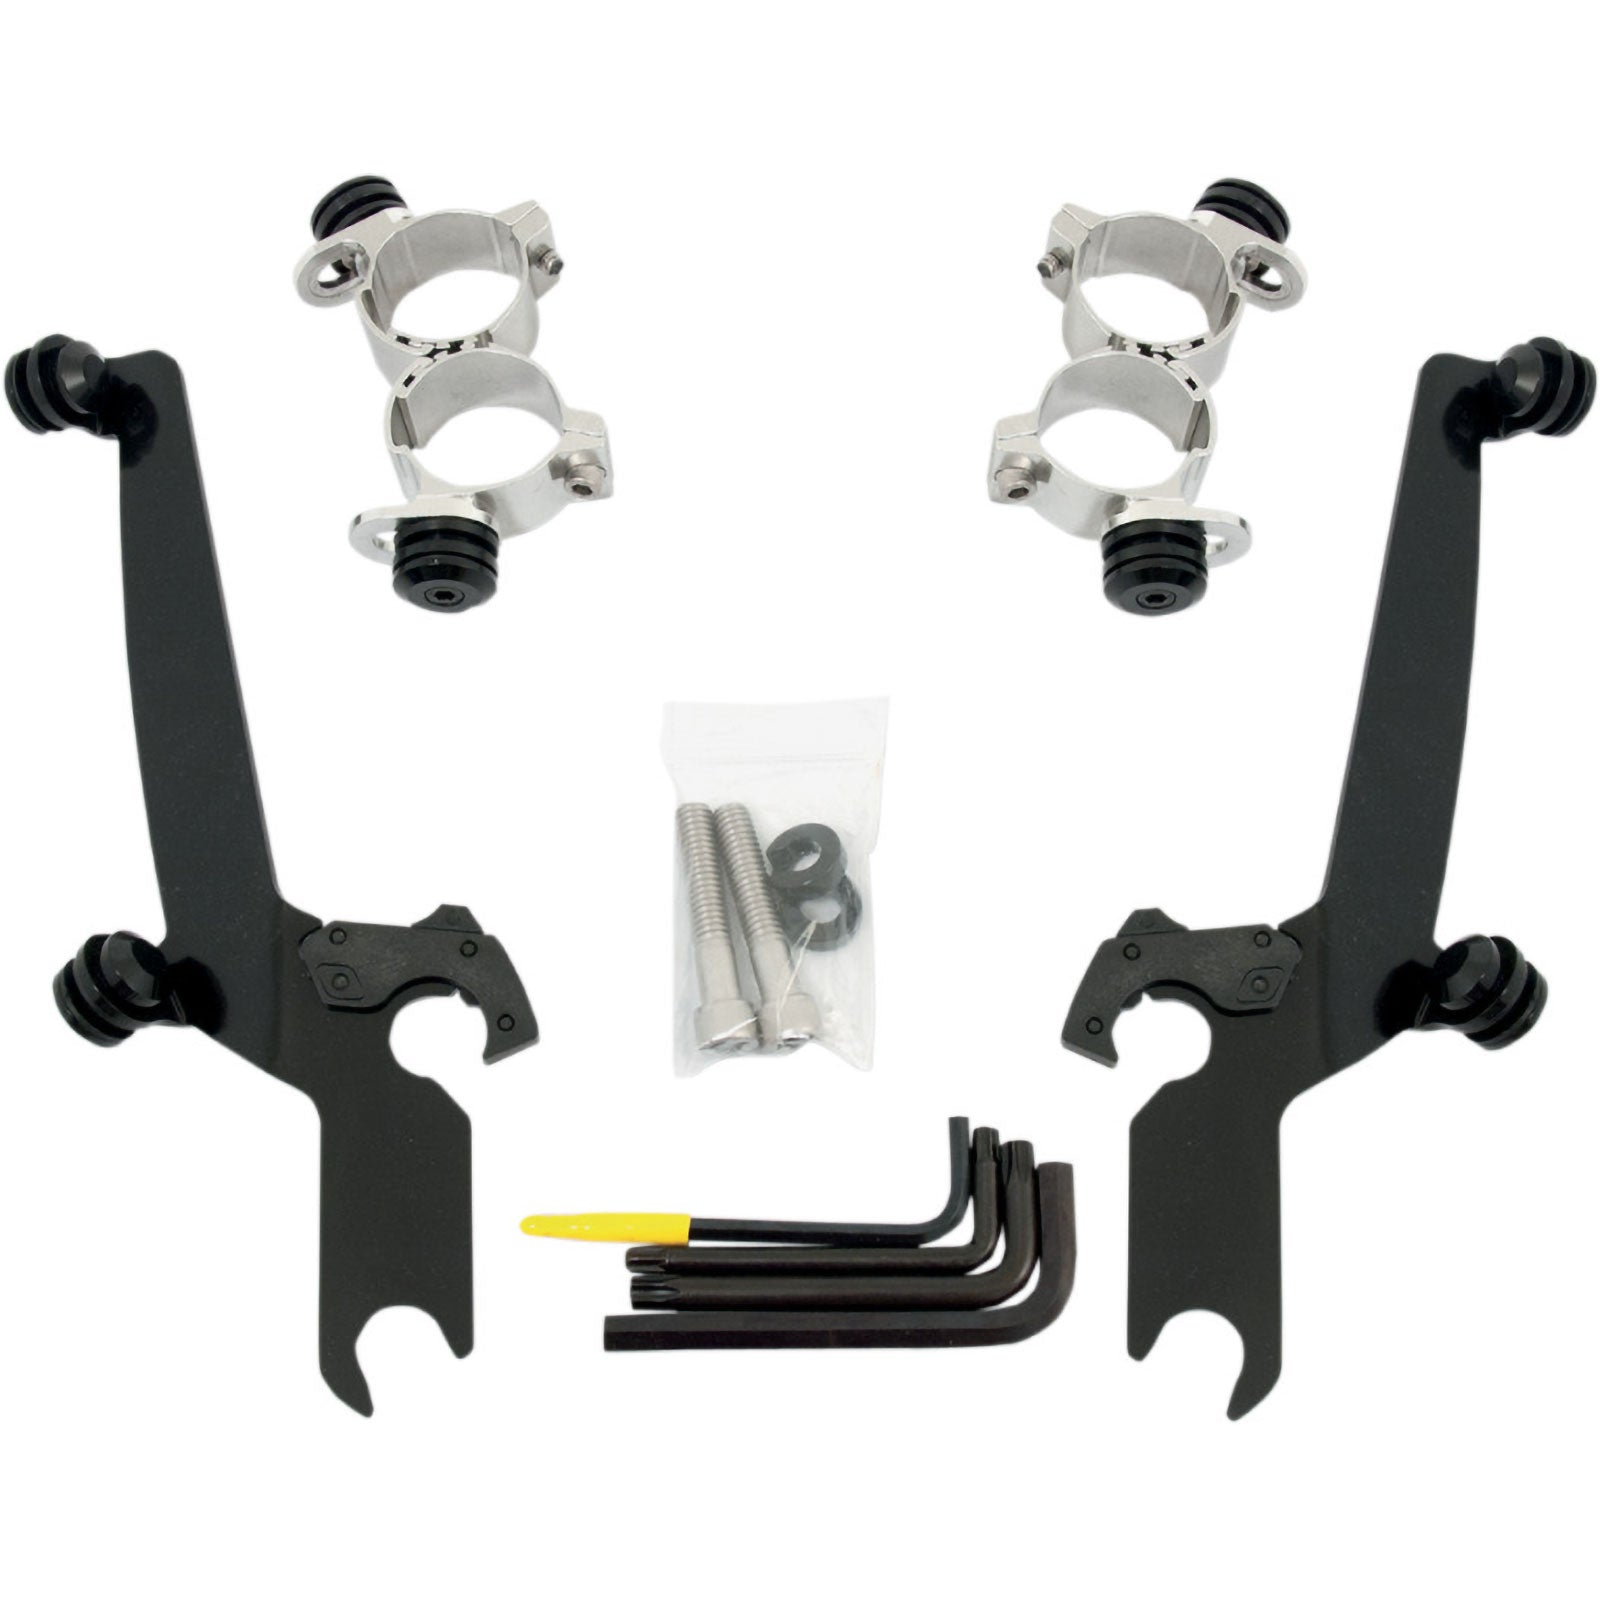 Memphis Shades XL48 Sportshield Trigger-Lock Complete Mount Kit Motorcycle Accessories-2320